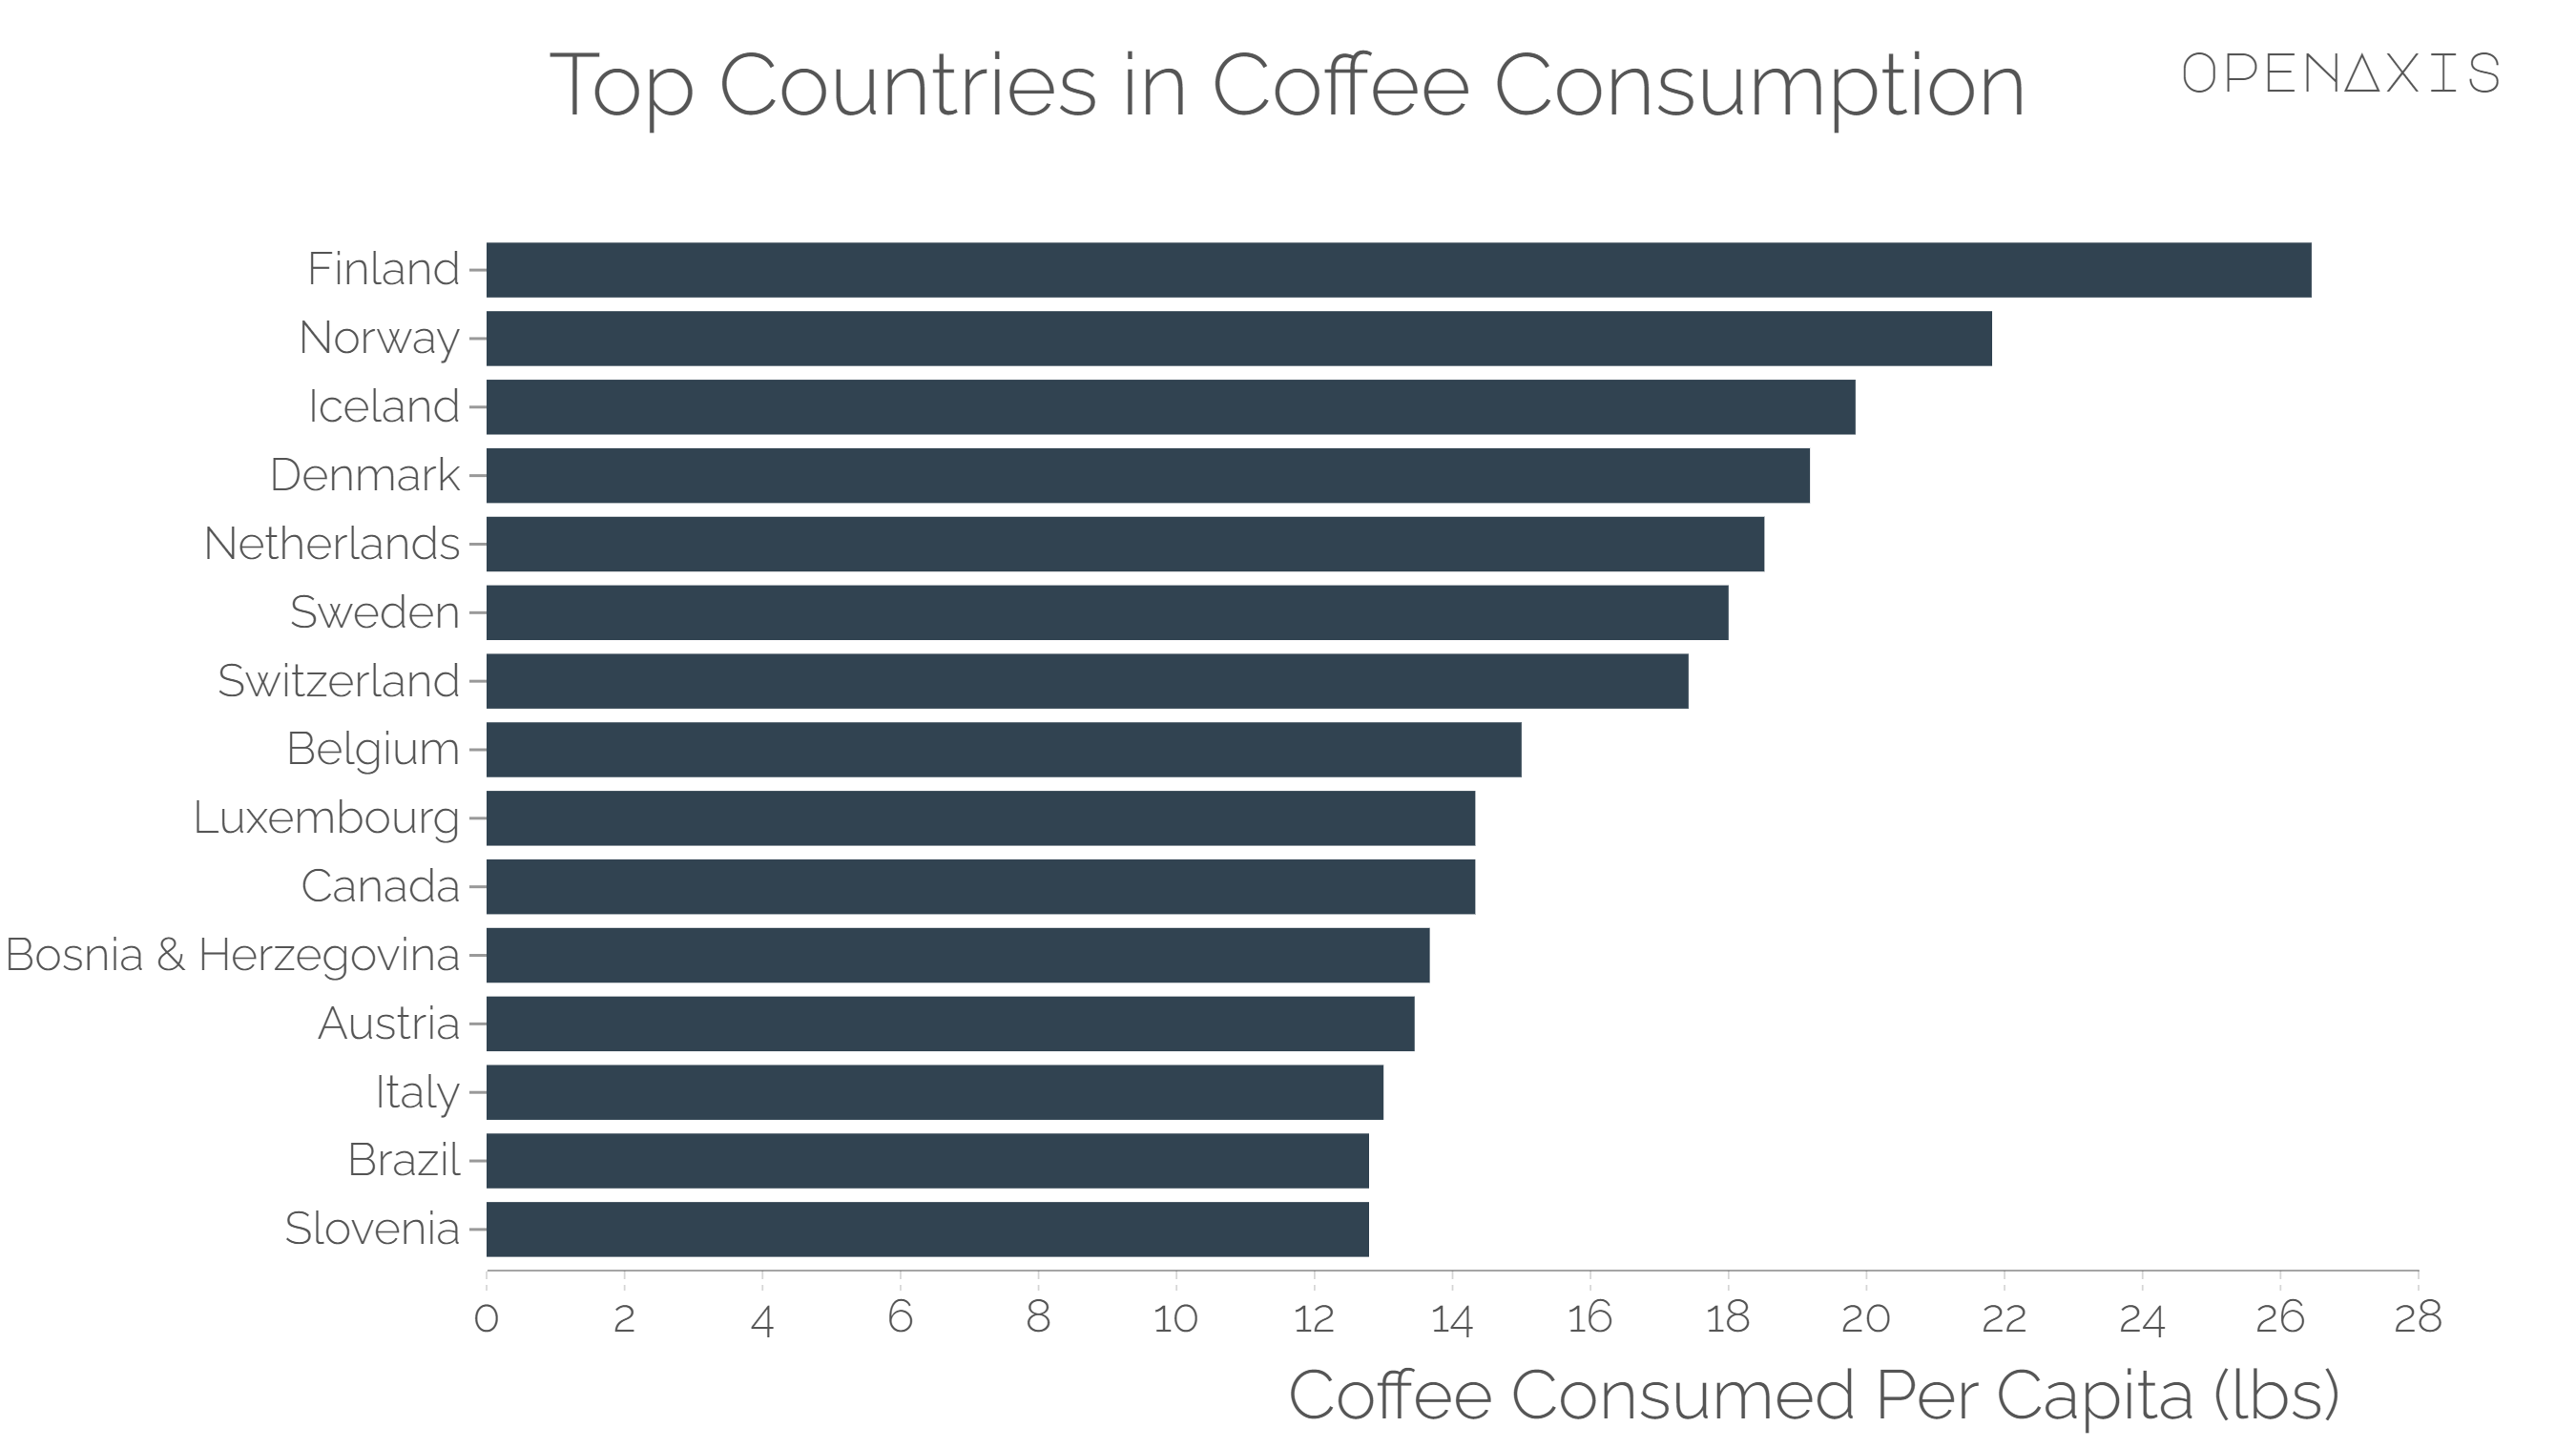 <p>Approximately 2 billion cups of coffee are consumed around the world every day.</p><p><br /></p><p>The <a href="https://app.openaxis.com/search?q=%231" target="_blank">#1</a> country for coffee consumption per capita is Finland, where 26.5 pounds are consumed per capita per year.</p><p><br /></p><p>The top five countries for coffee consumption are Finland (26.5 Lbs per capita), Norway (21.82 Lbs per capita), Iceland (19.84 Lbs per capita), Denmark (19.18 Lbs per capita), and the Netherlands (18.52 Lbs per capita).</p><p><br /></p><p><span data-index="0" data-denotation-char data-id="0" data-value="&lt;a href=&quot;/search?q=%23coffee&quot; target=_self&gt;#coffee" data-link="/search?q=%23coffee">﻿<span contenteditable="false"><span></span><a href="/search?q=%23coffee" target="_self">#coffee</a></span>﻿</span></p><p><br /></p><p>Source: <a href="/data/4066" target="_blank">Zippia, ICO</a></p><p><br /></p>